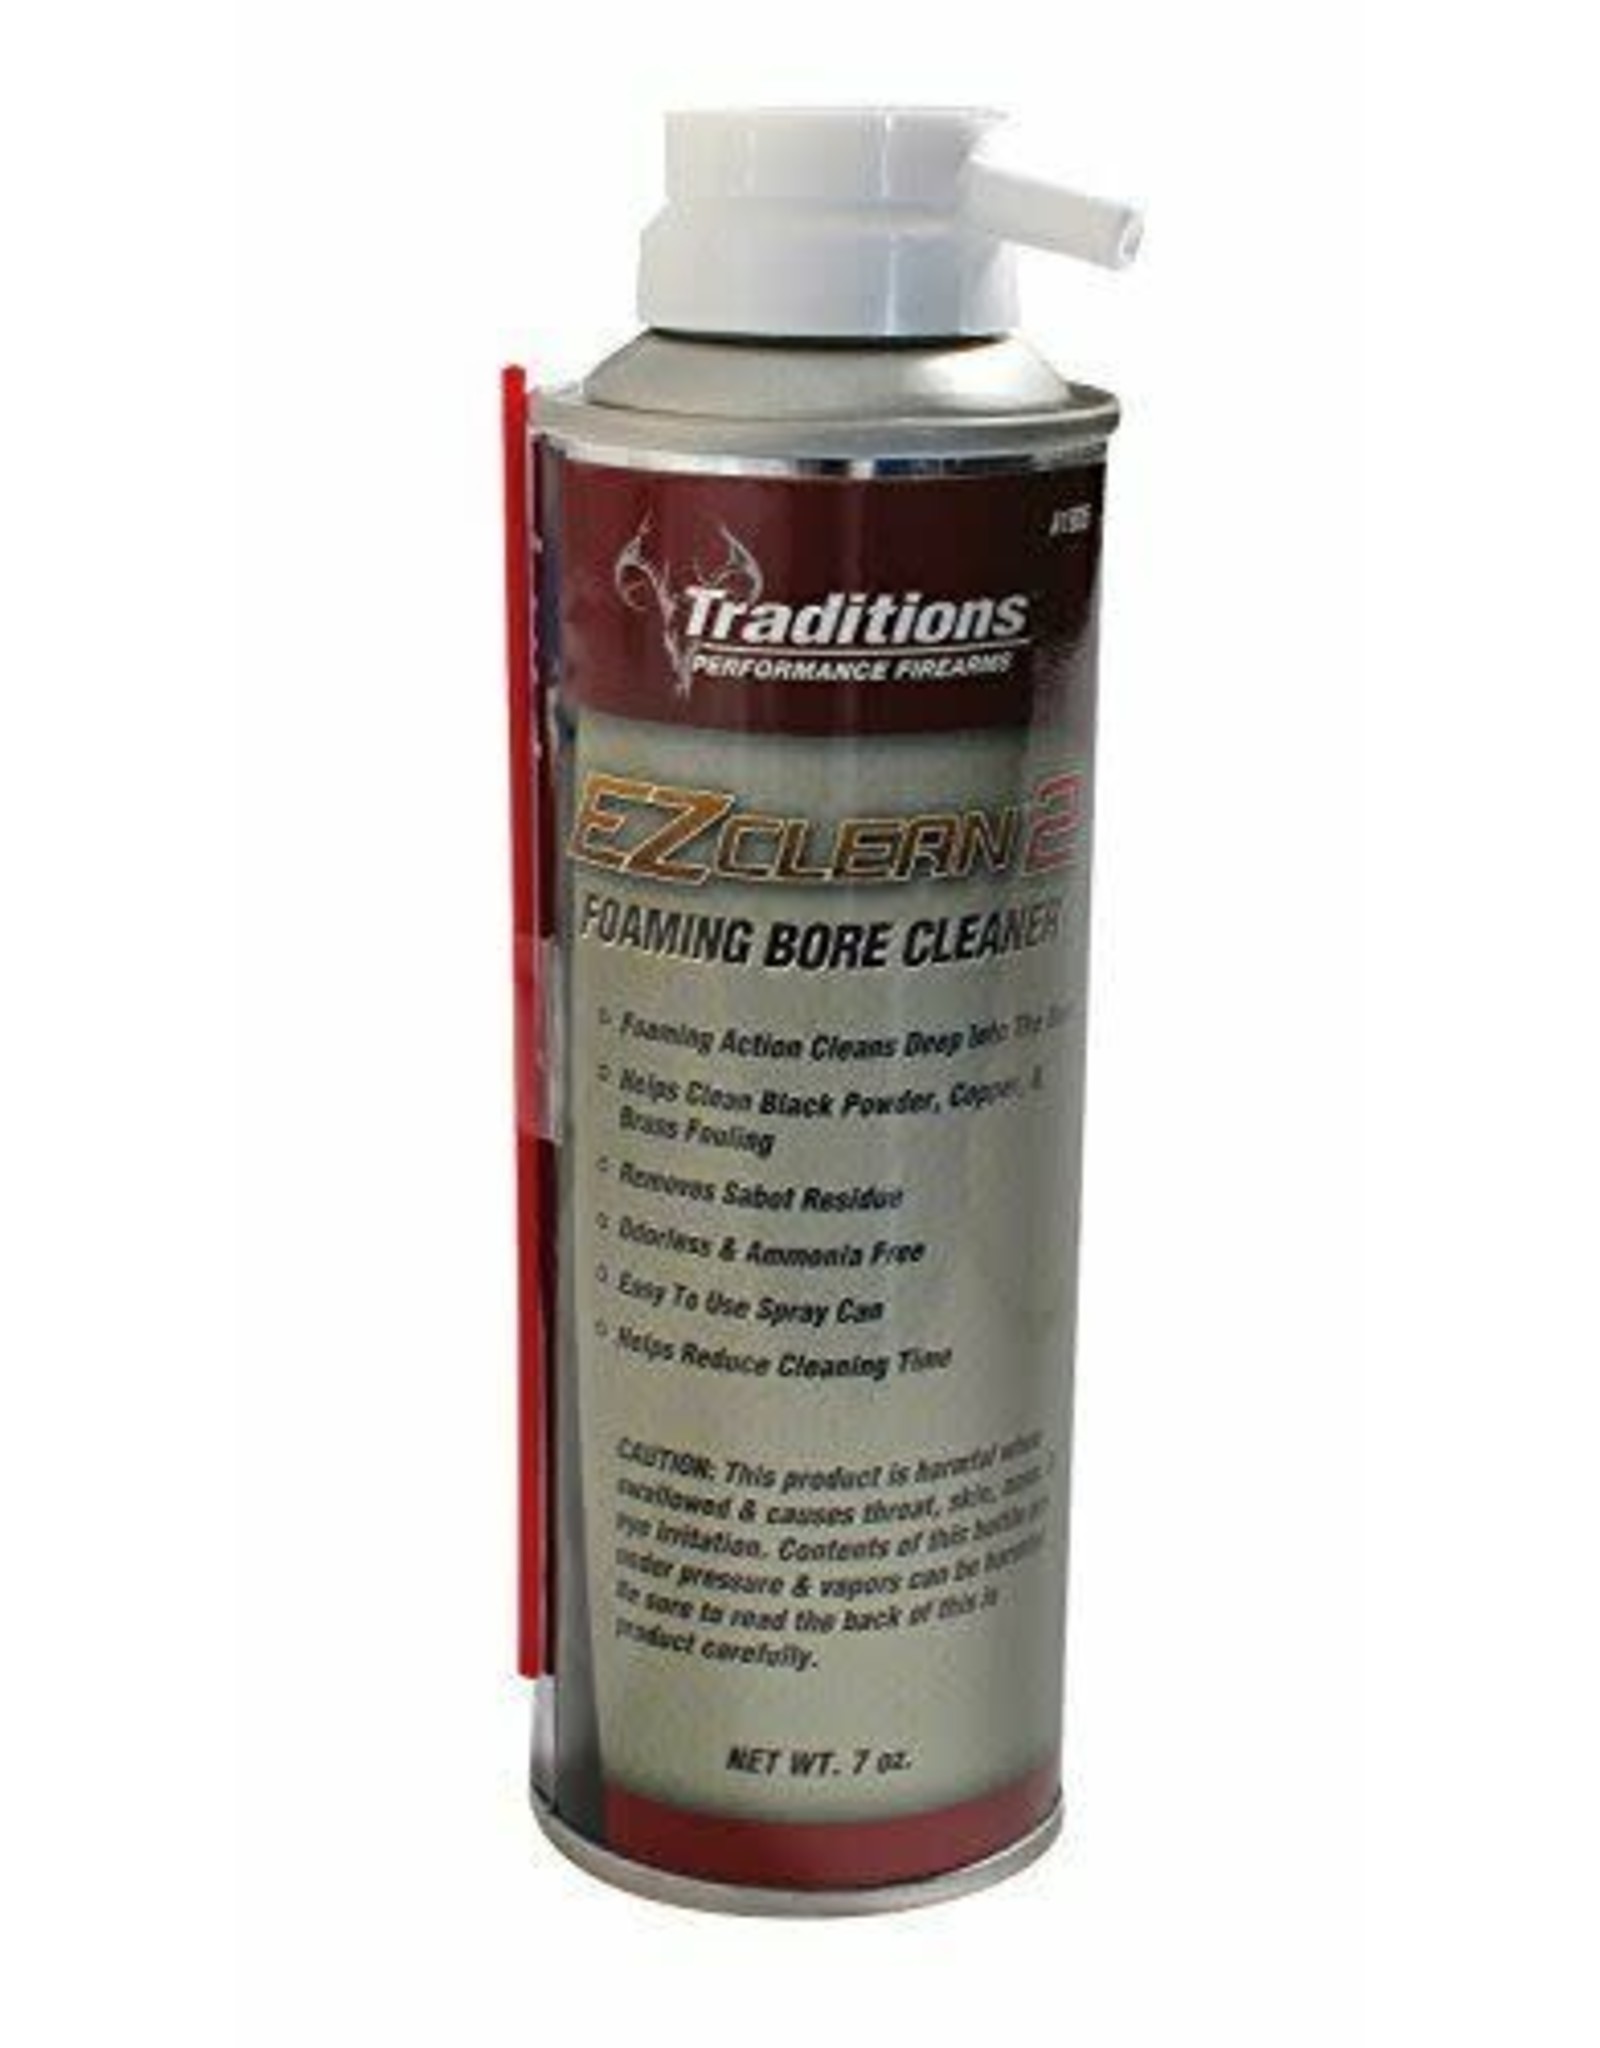 Traditions EZ Clean 2 Foaming Bore Cleaner